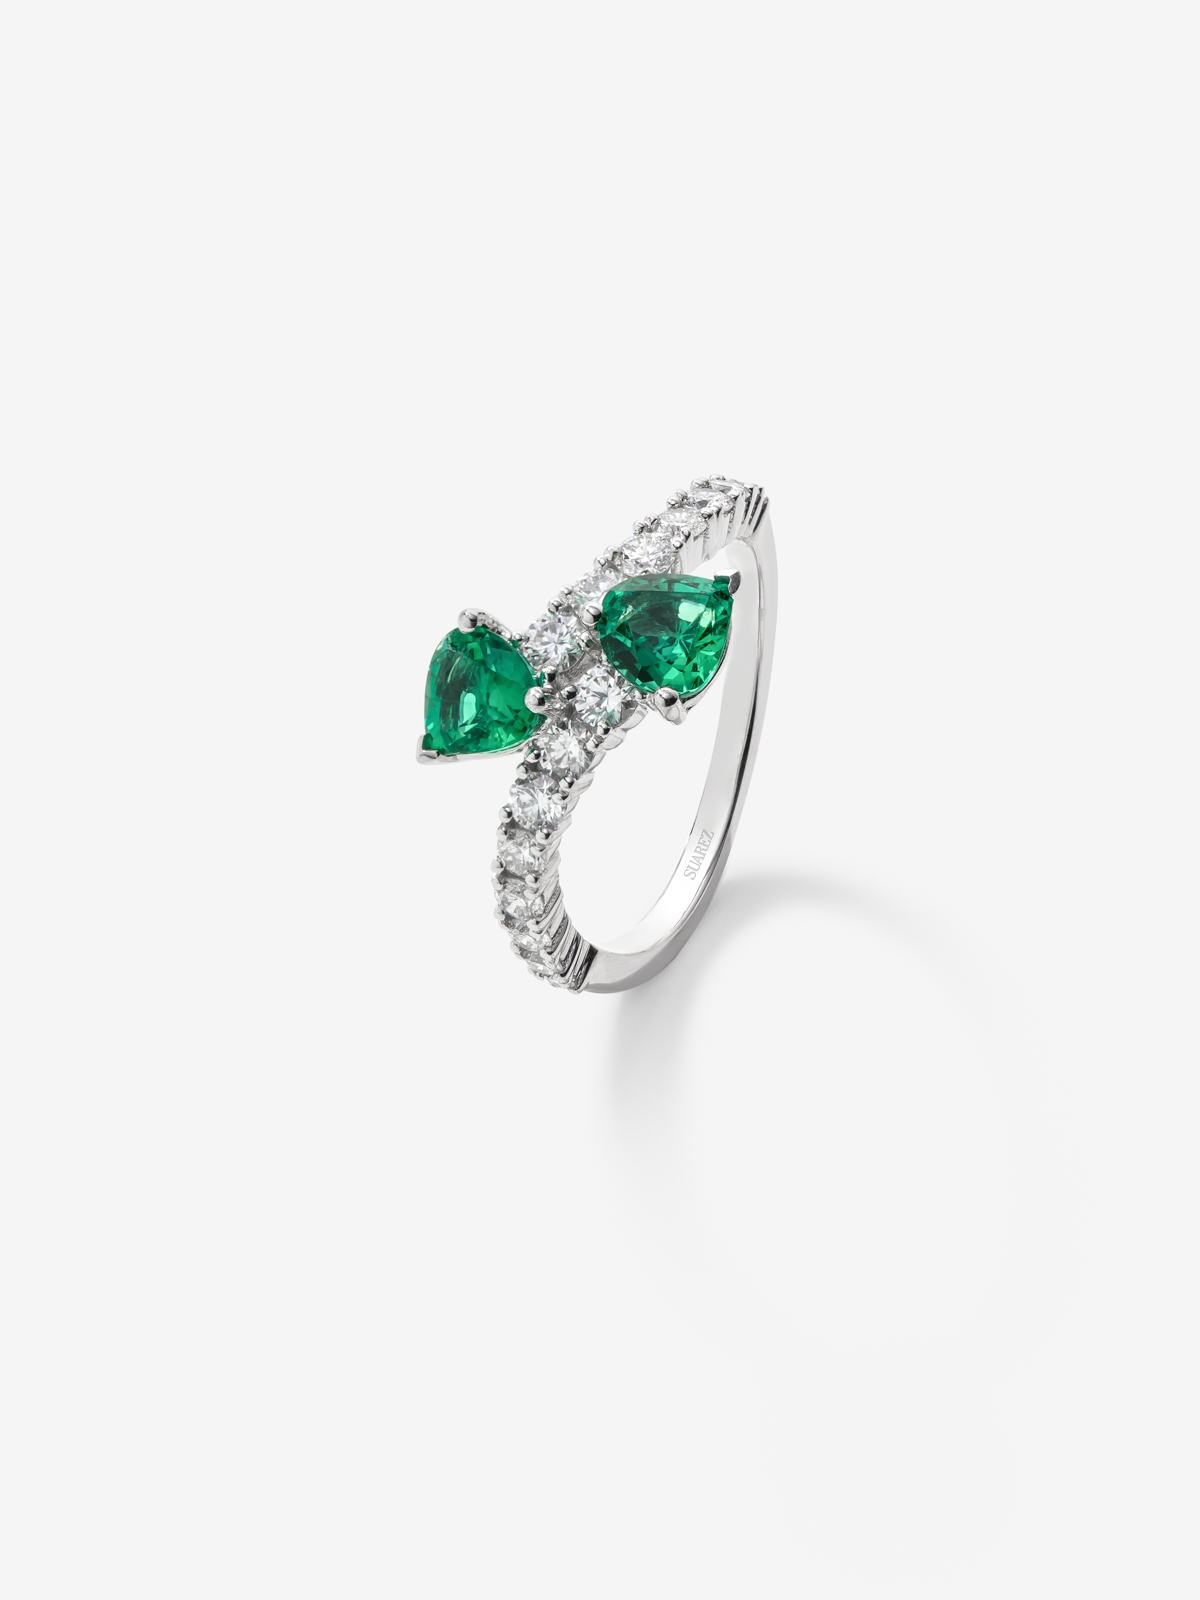 You and I 18k White Gold Ring with Green Emeralds in 0.98 cts and white diamonds in a bright 0.6 cts diamonds